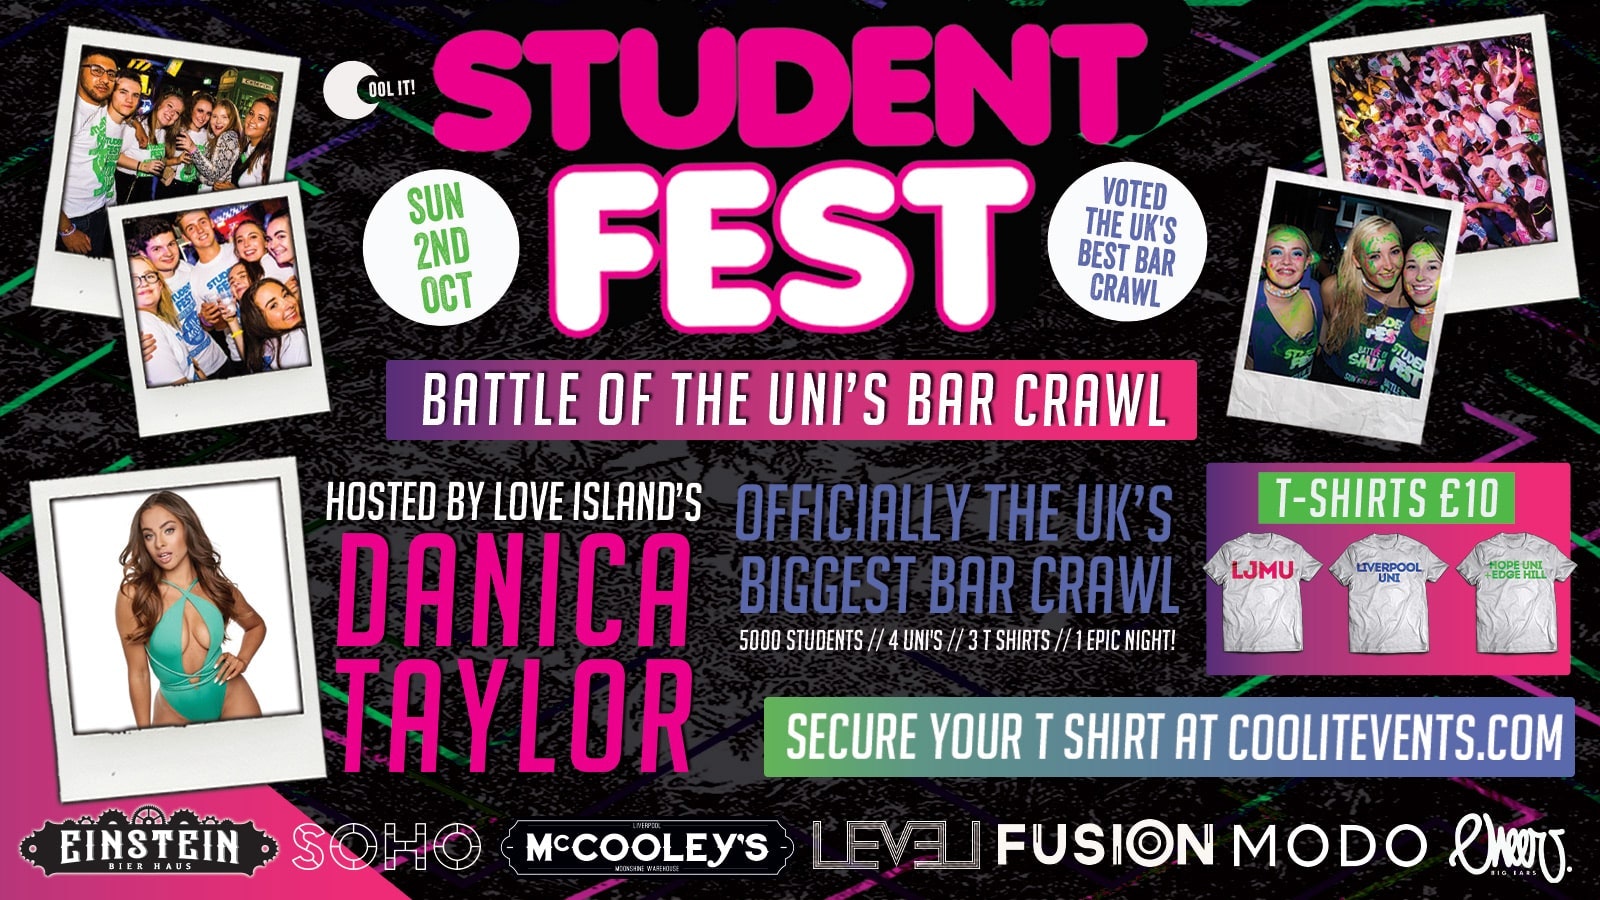 Student Fest hosted by DANICA TAYLOR: The UK’s Biggest Bar Crawl – Battle Of The Uni’s 2022